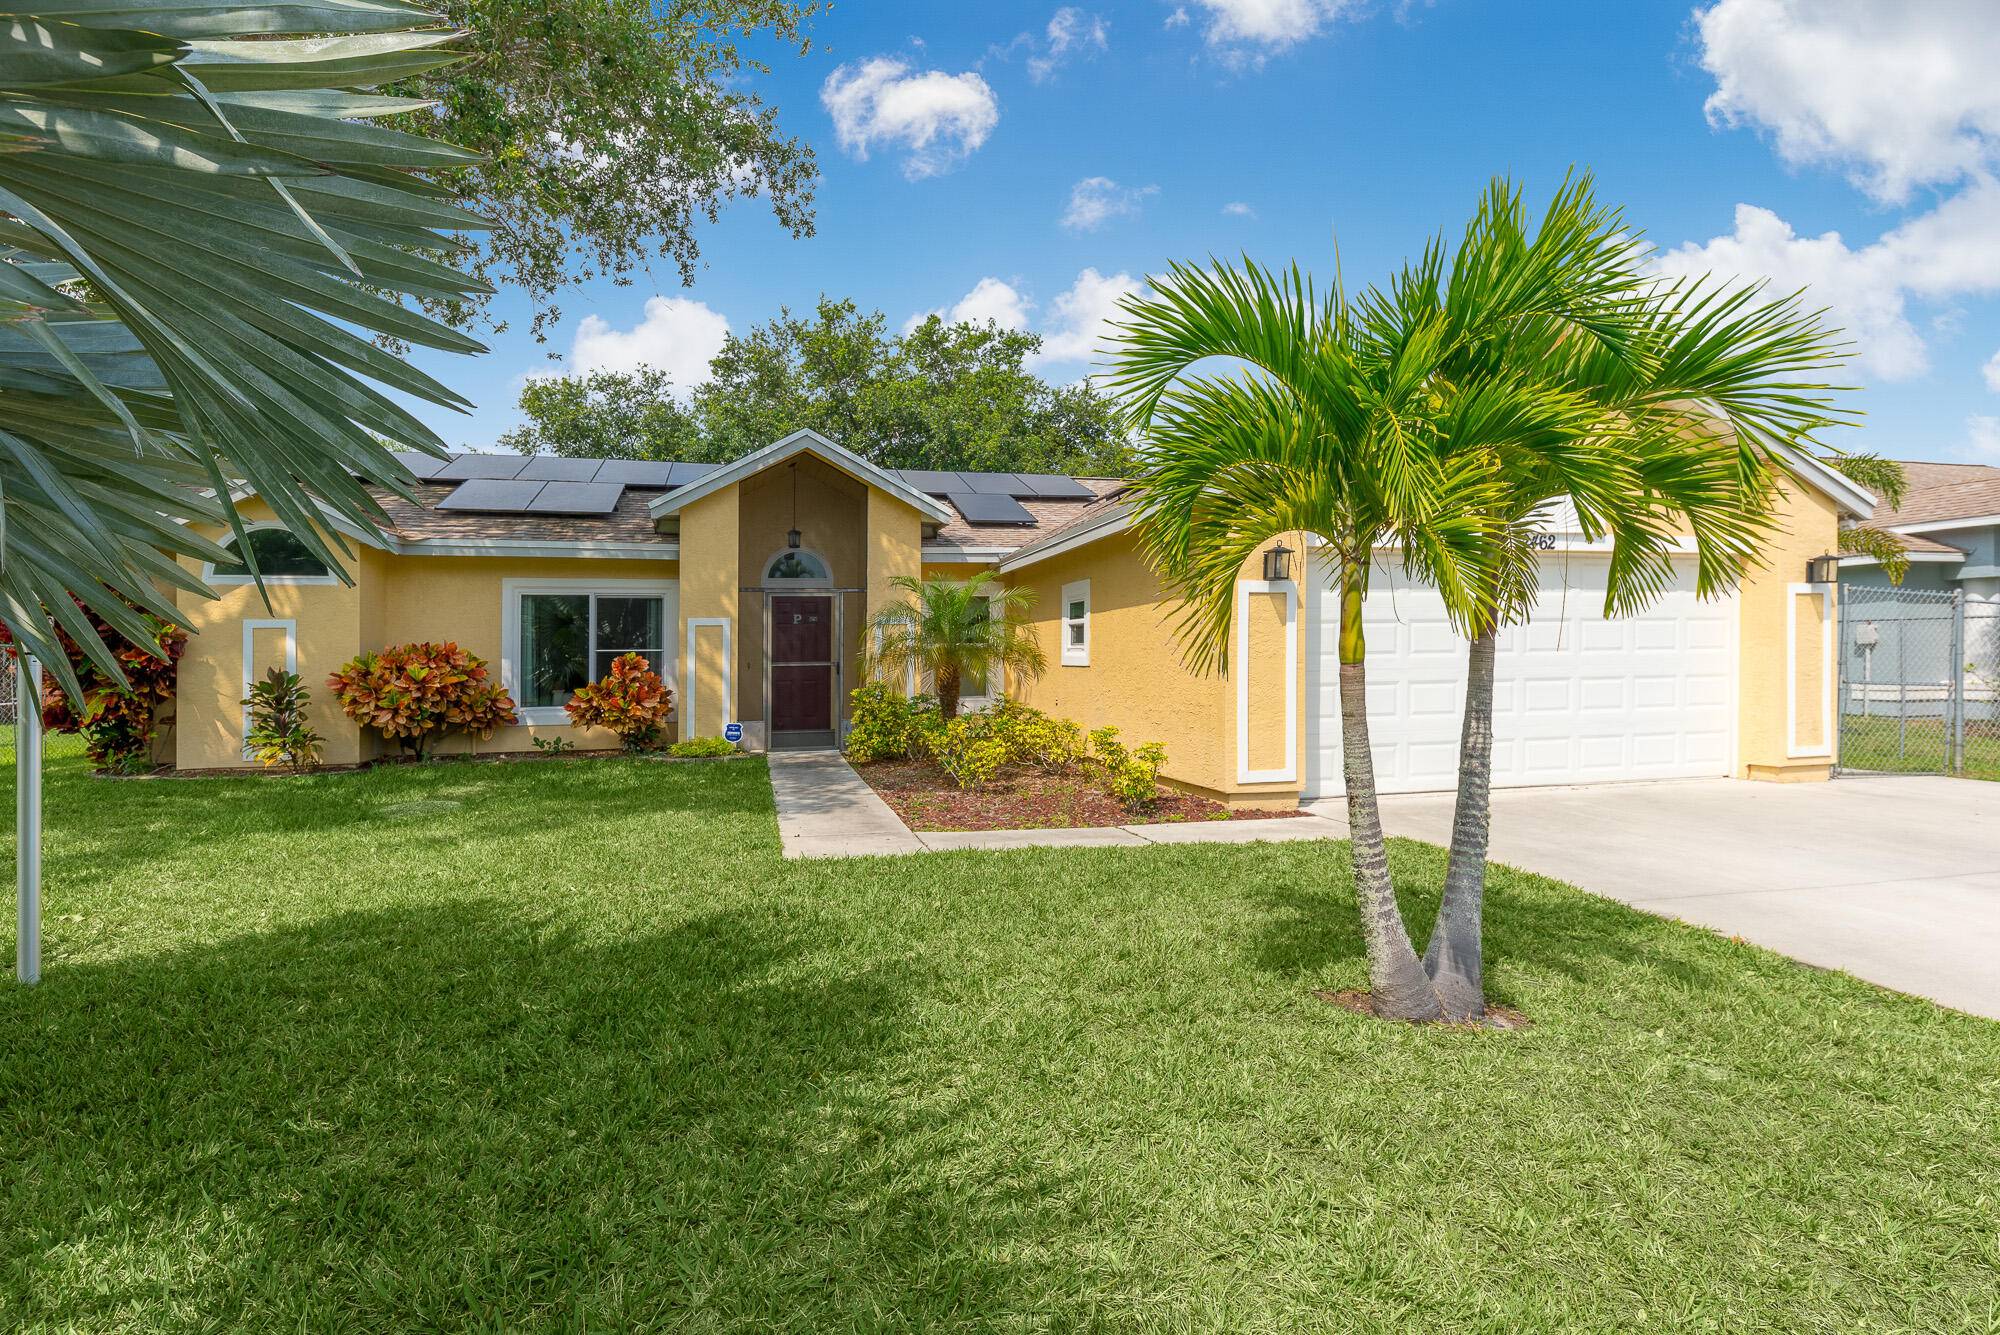 Welcome to Paradise ! Nestled on an oversized lot, this adorable three bedroom, two bathroom home offers a slice of Florida heaven !